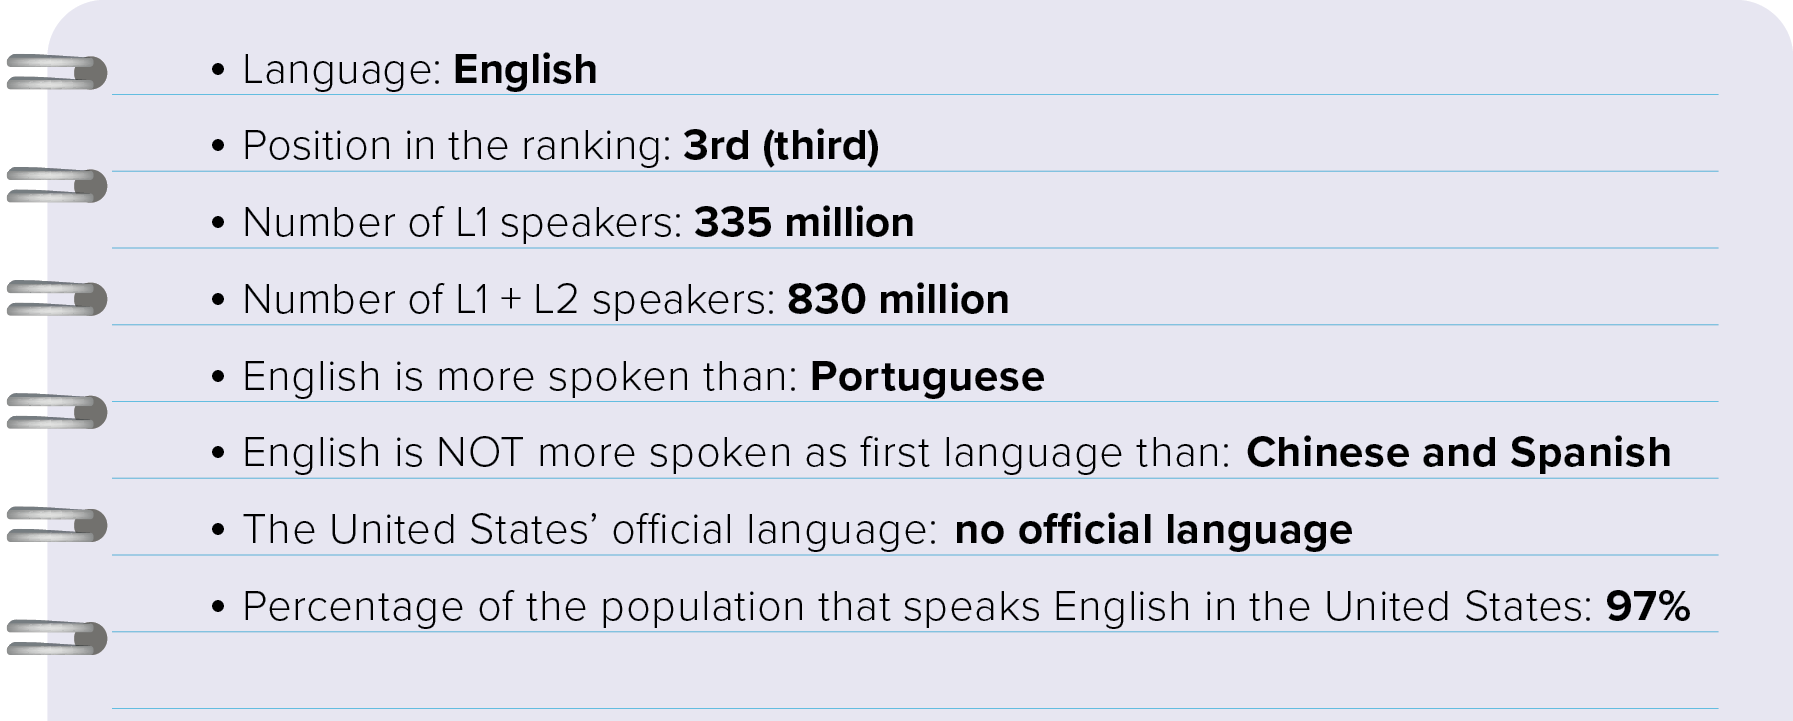 Ilustração de página de caderno pautada onde se lê: Language: English Position in the ranking: 3rd (third) Number of L1 speakers: 335 million Number of L1 + L2 speakers: 830 million English is more spoken than: Portuguese English is NOT more spoken as first language than: Chinese and Spanish The United States’ o•cial language: no ocial language Percentage of the population that speaks English in the United States: 97%